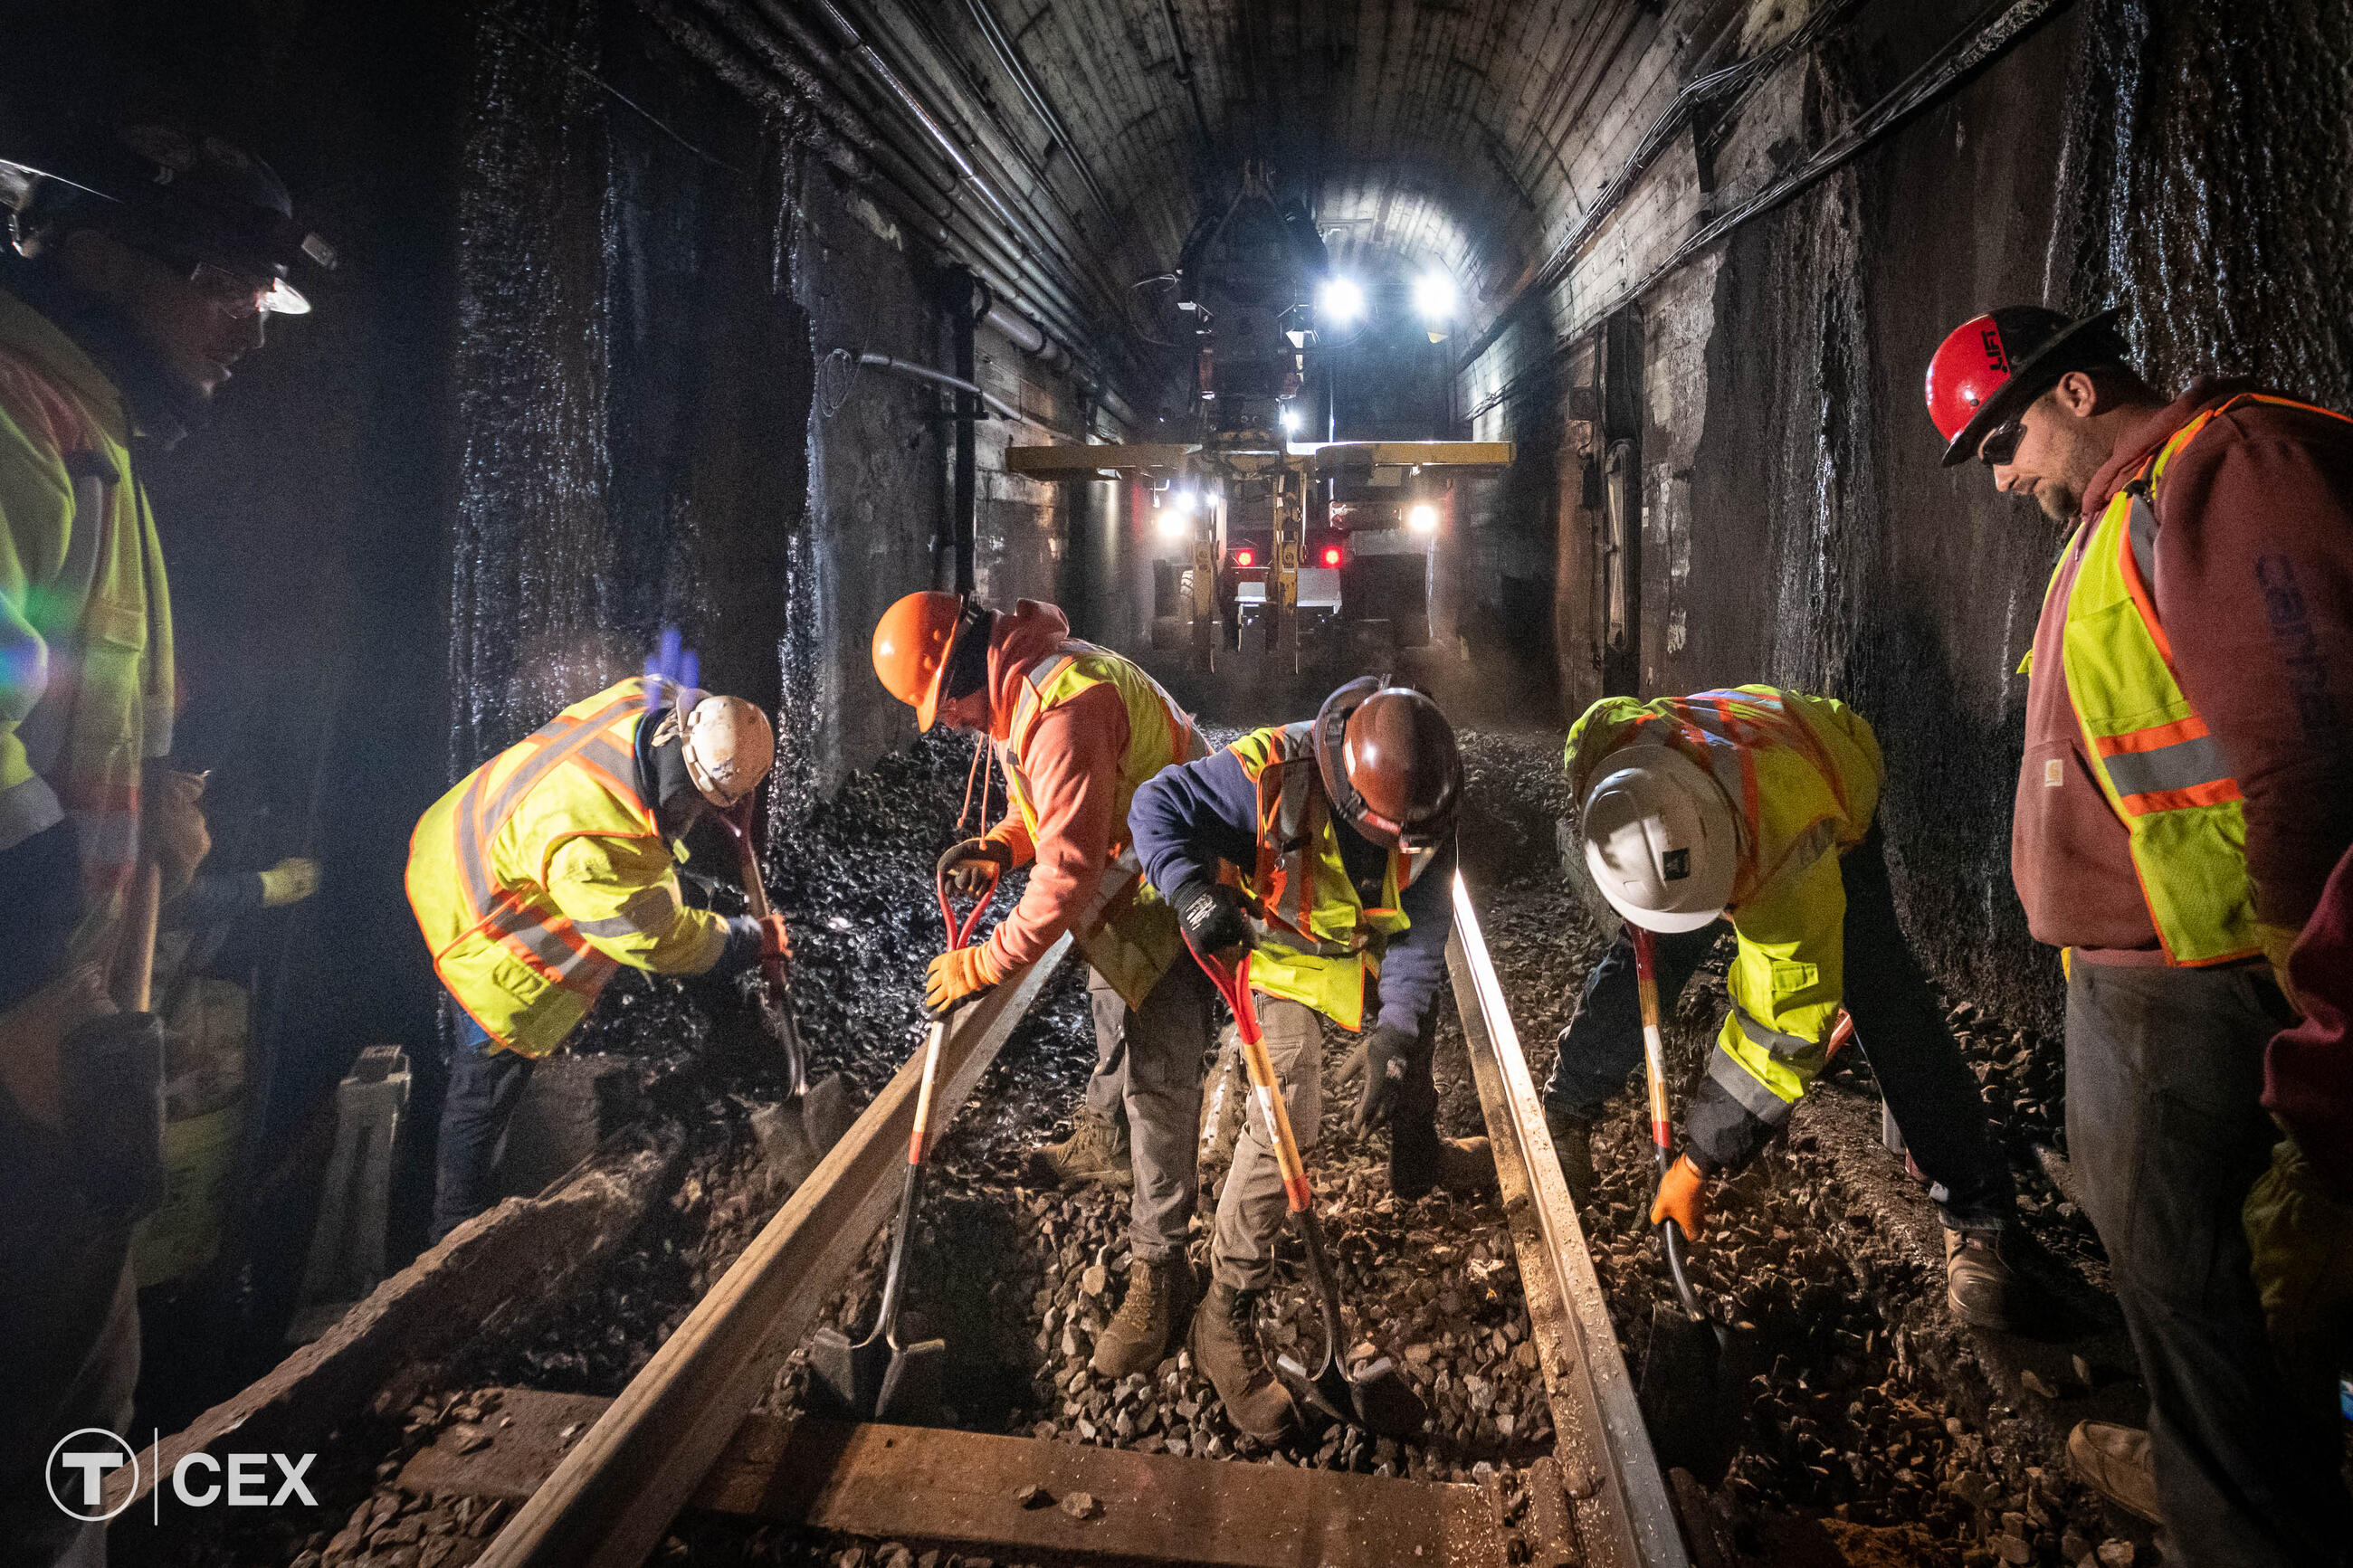 Crews performed track work in the underground tunnel of the Green Line. Complimentary photo by the MBTA Customer and Employee Experience Department.